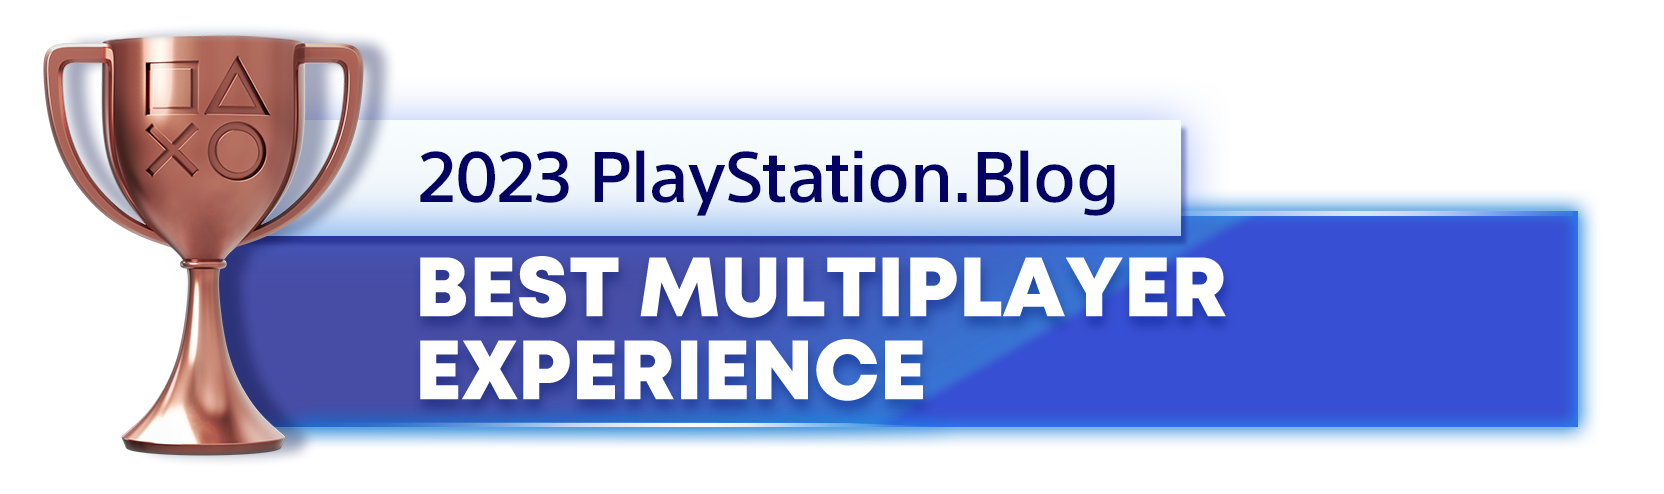  "Bronze Trophy for the 2023 PlayStation Blog Best Multiplayer Experience Winner"